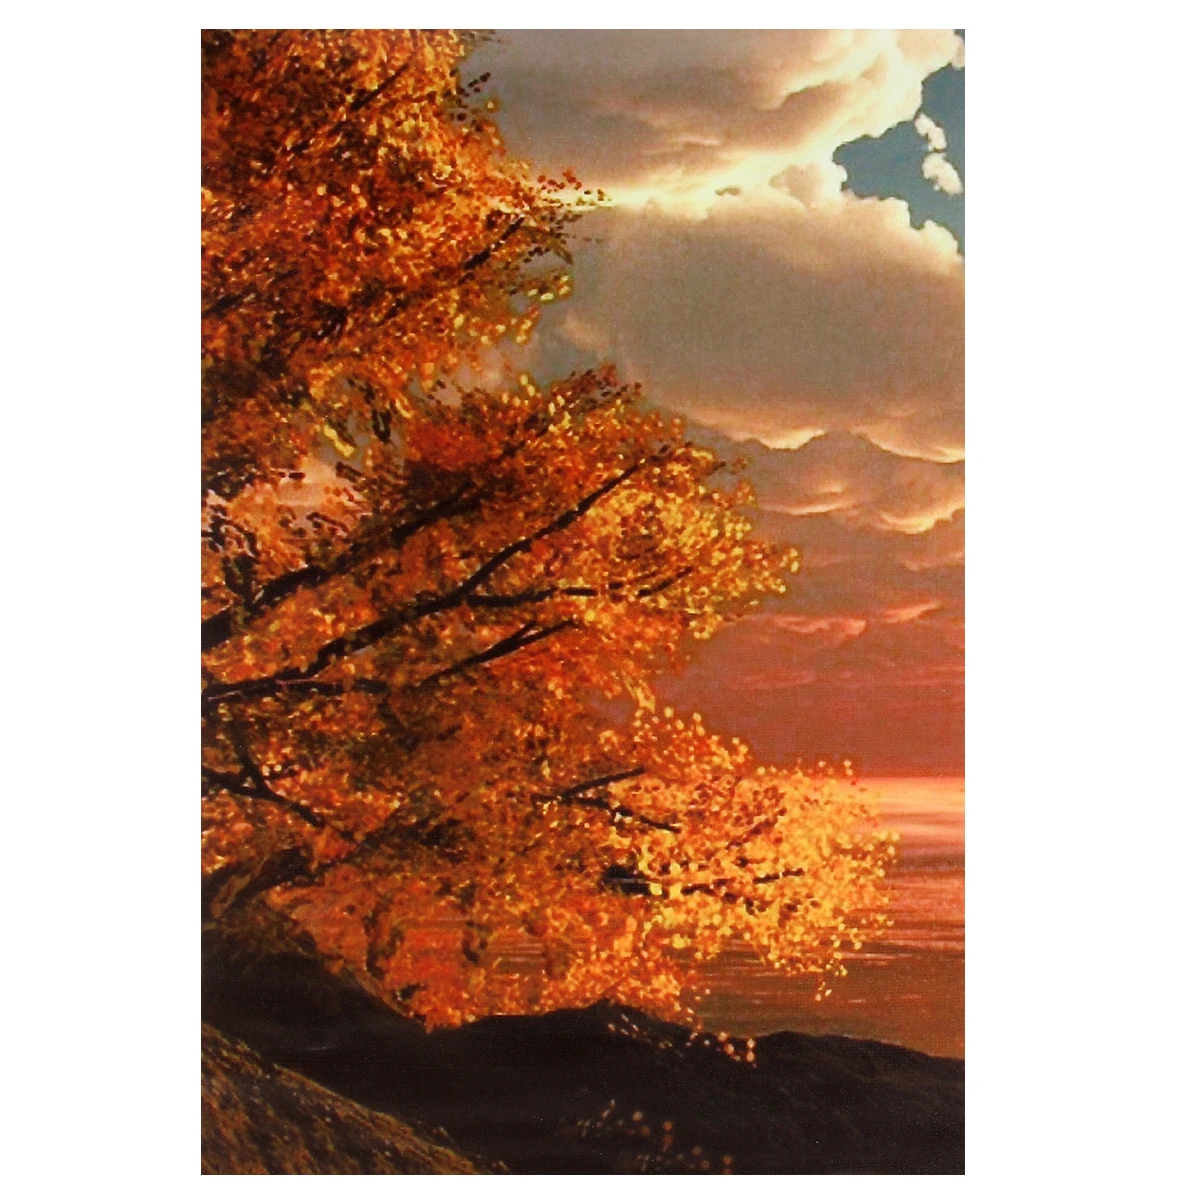 3 Cascade Day Sunset Scene Canvas Painting Decorative Wall Picture Home Decoration Unframed 